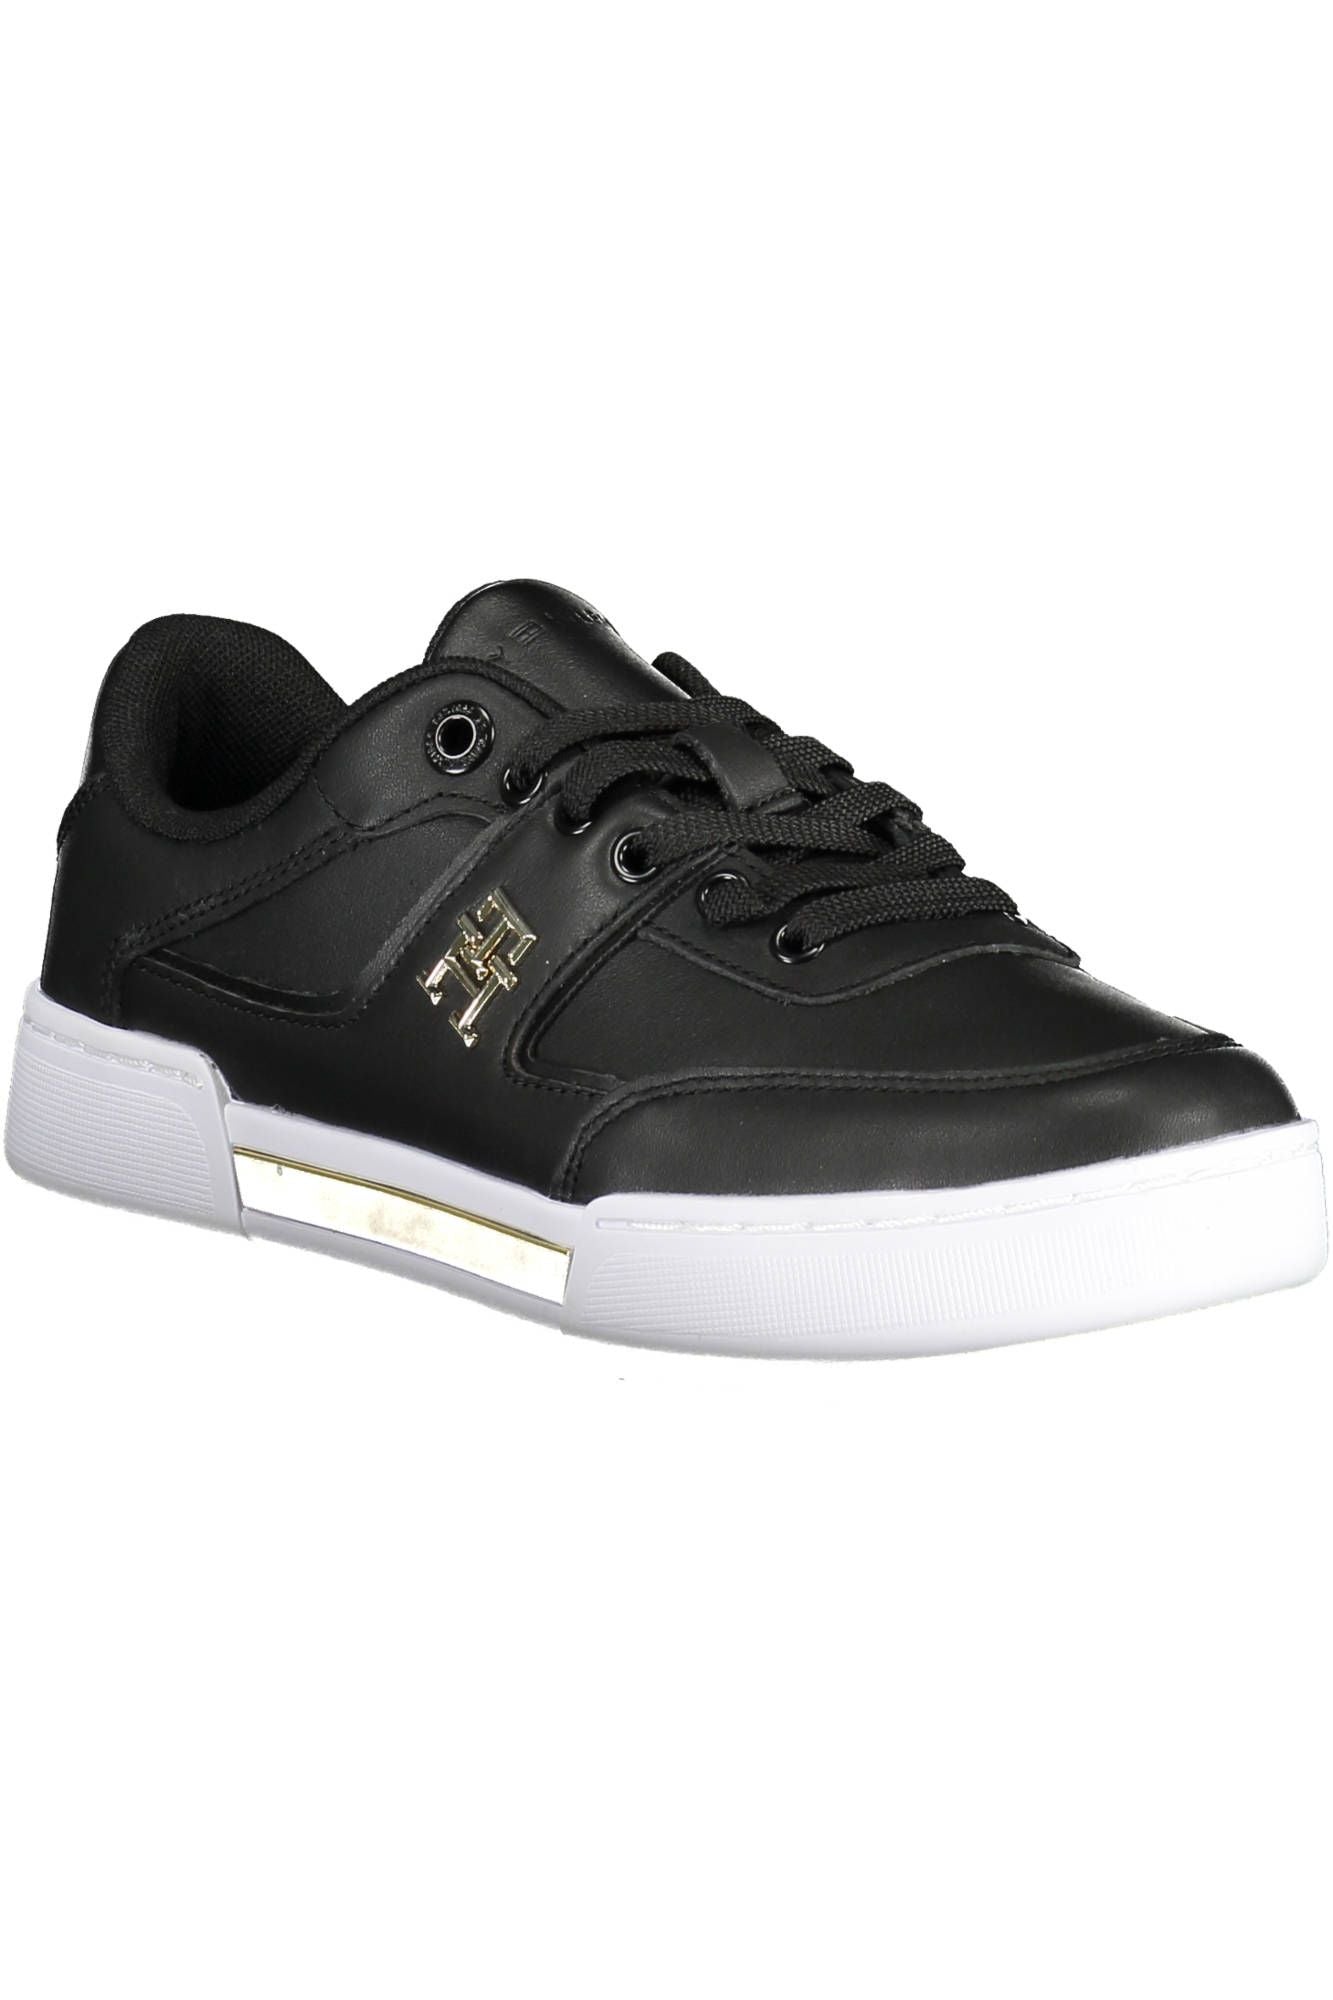 Tommy Hilfiger Chic Black Lace-Up Sneakers with Contrasting Accents